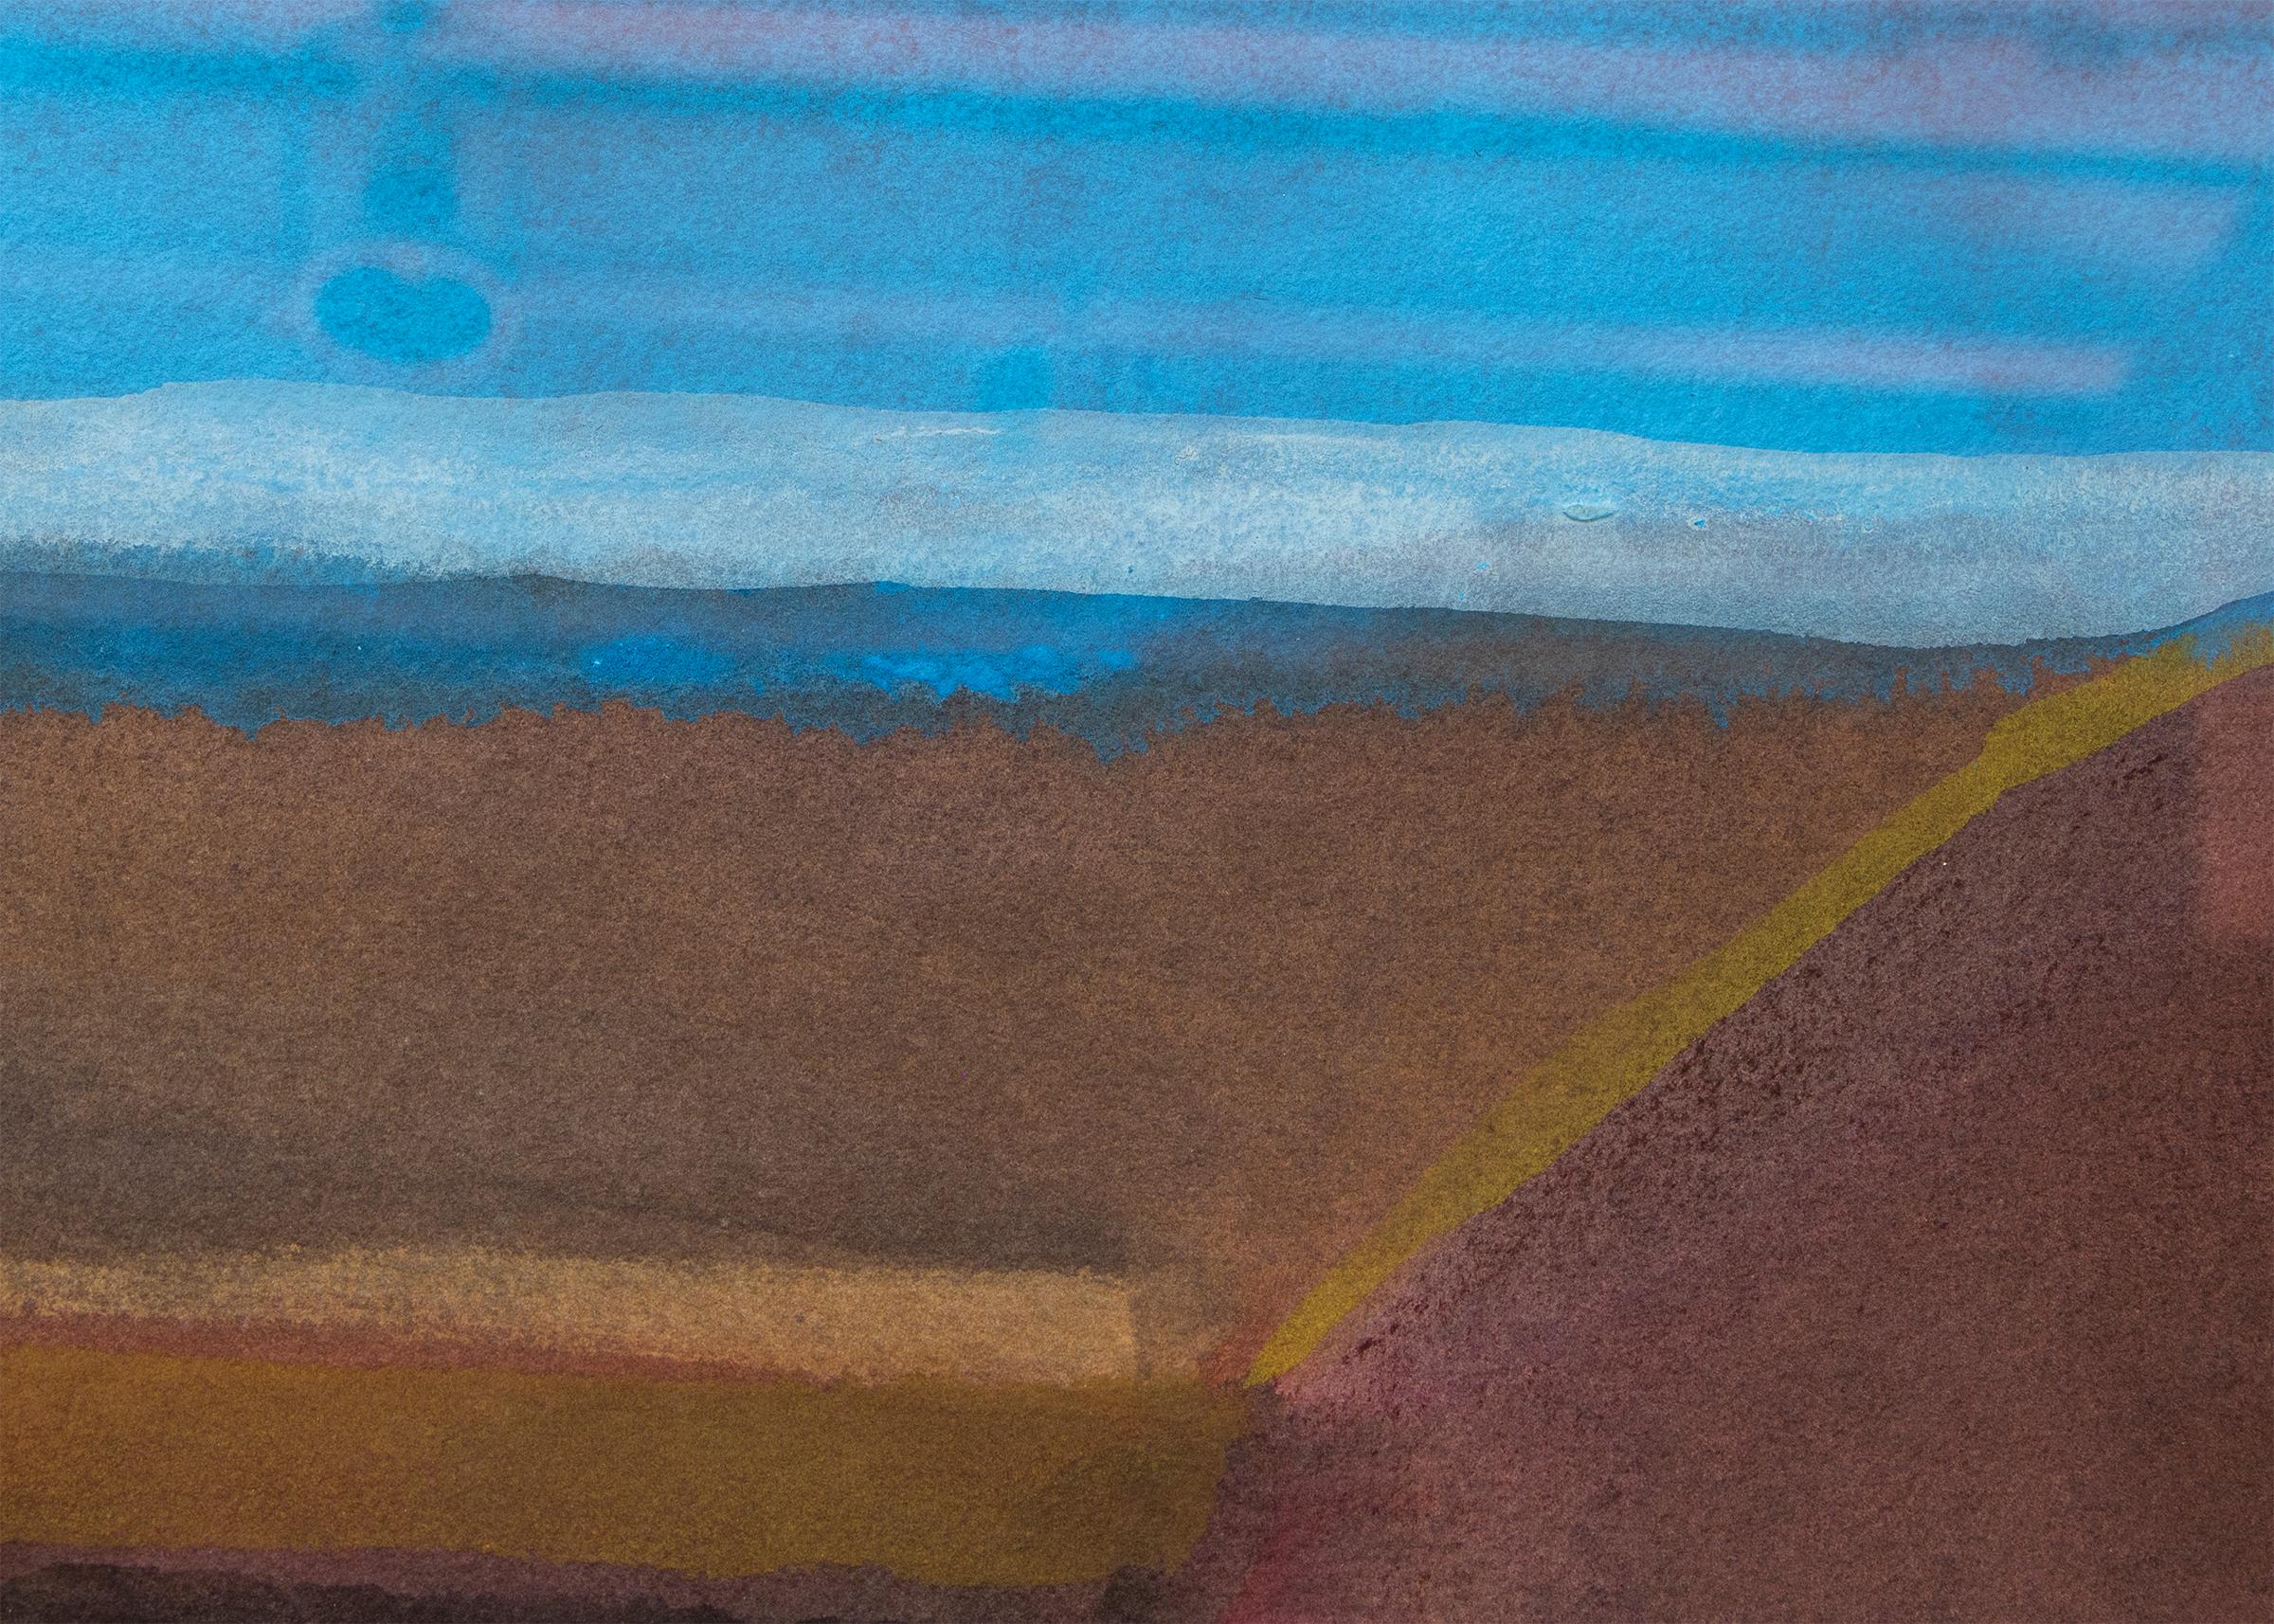 Untitled (Abstract Painting in Shades of Blue, Brown, Reddish Pink and Yellow) 3